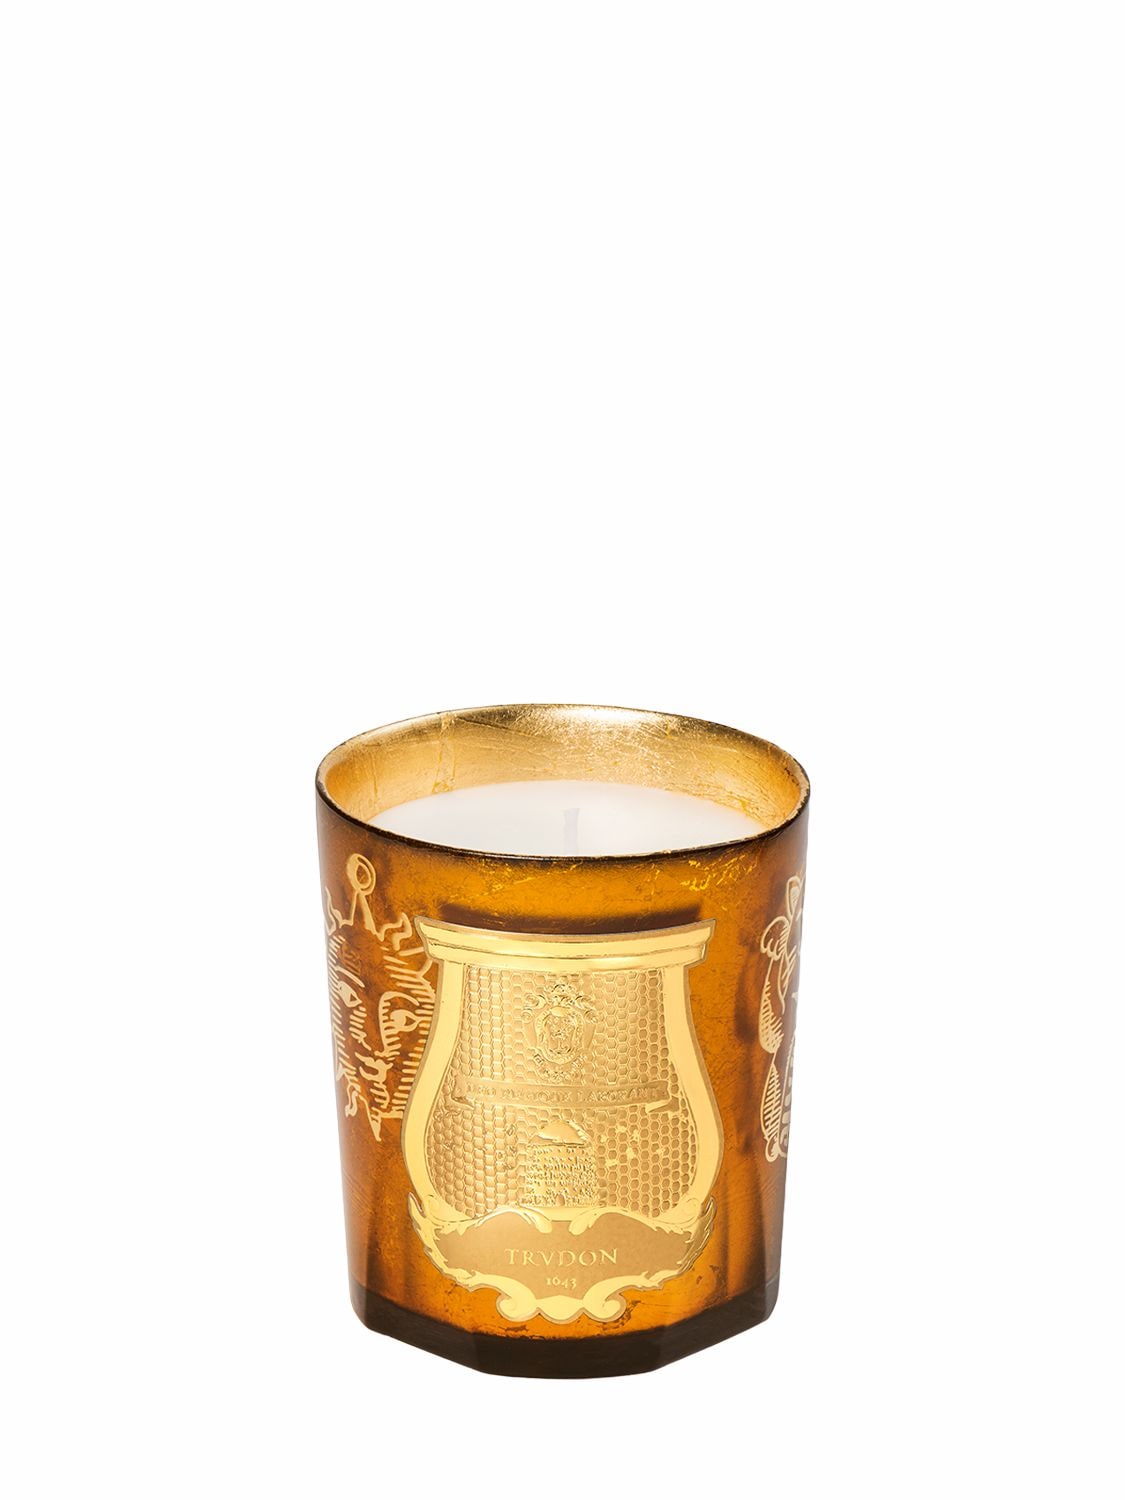 TRUDON 270GR CHRISTMAS SPELLA SCENTED CANDLE